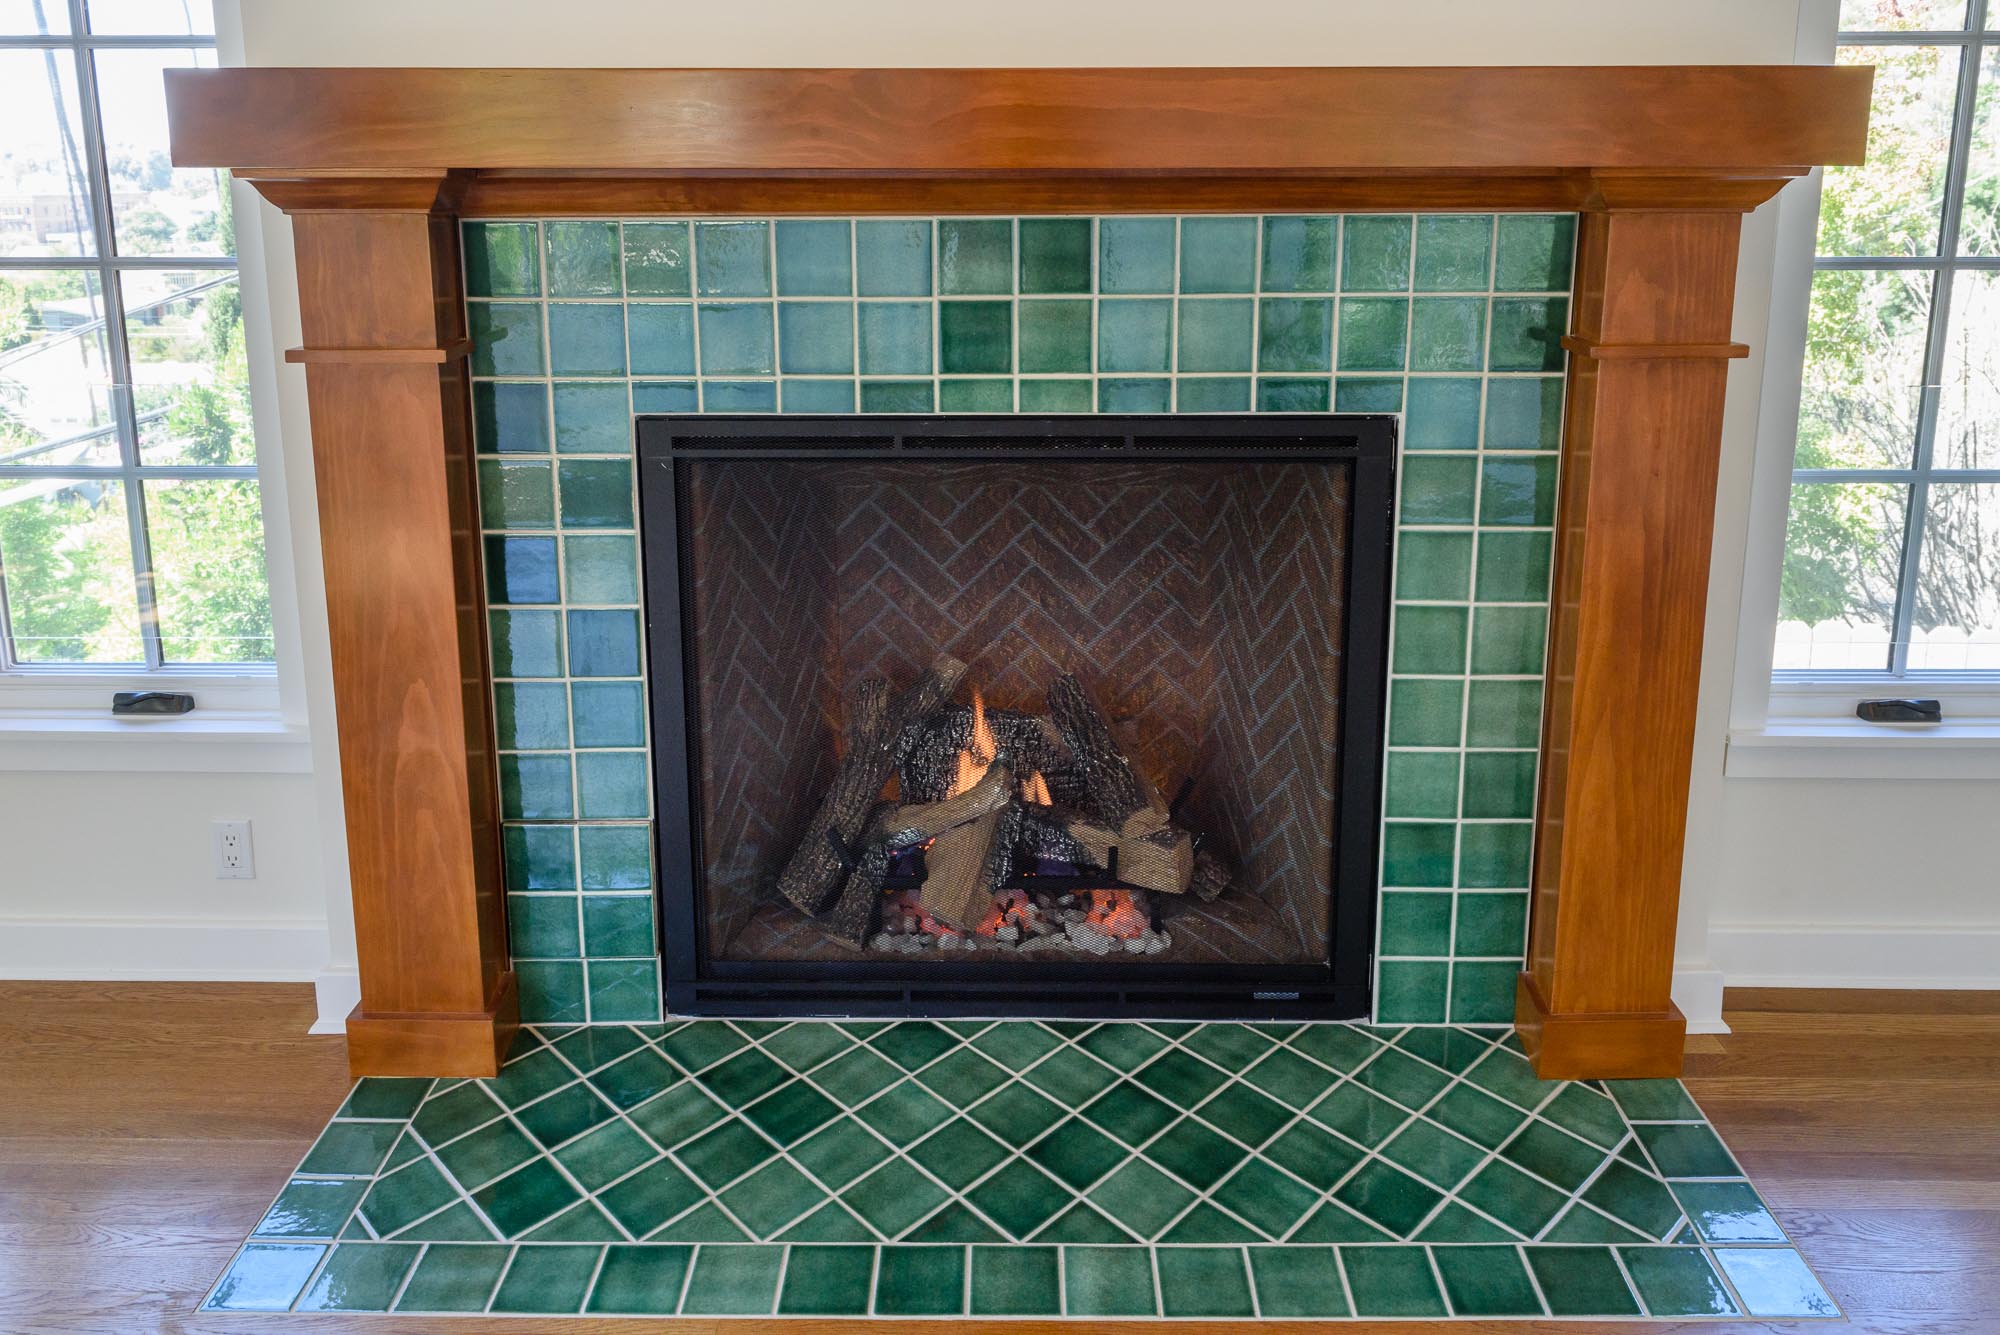  Easy to use remote control gas log fire framed with beautiful hand-made tile surround and wood mantel. 